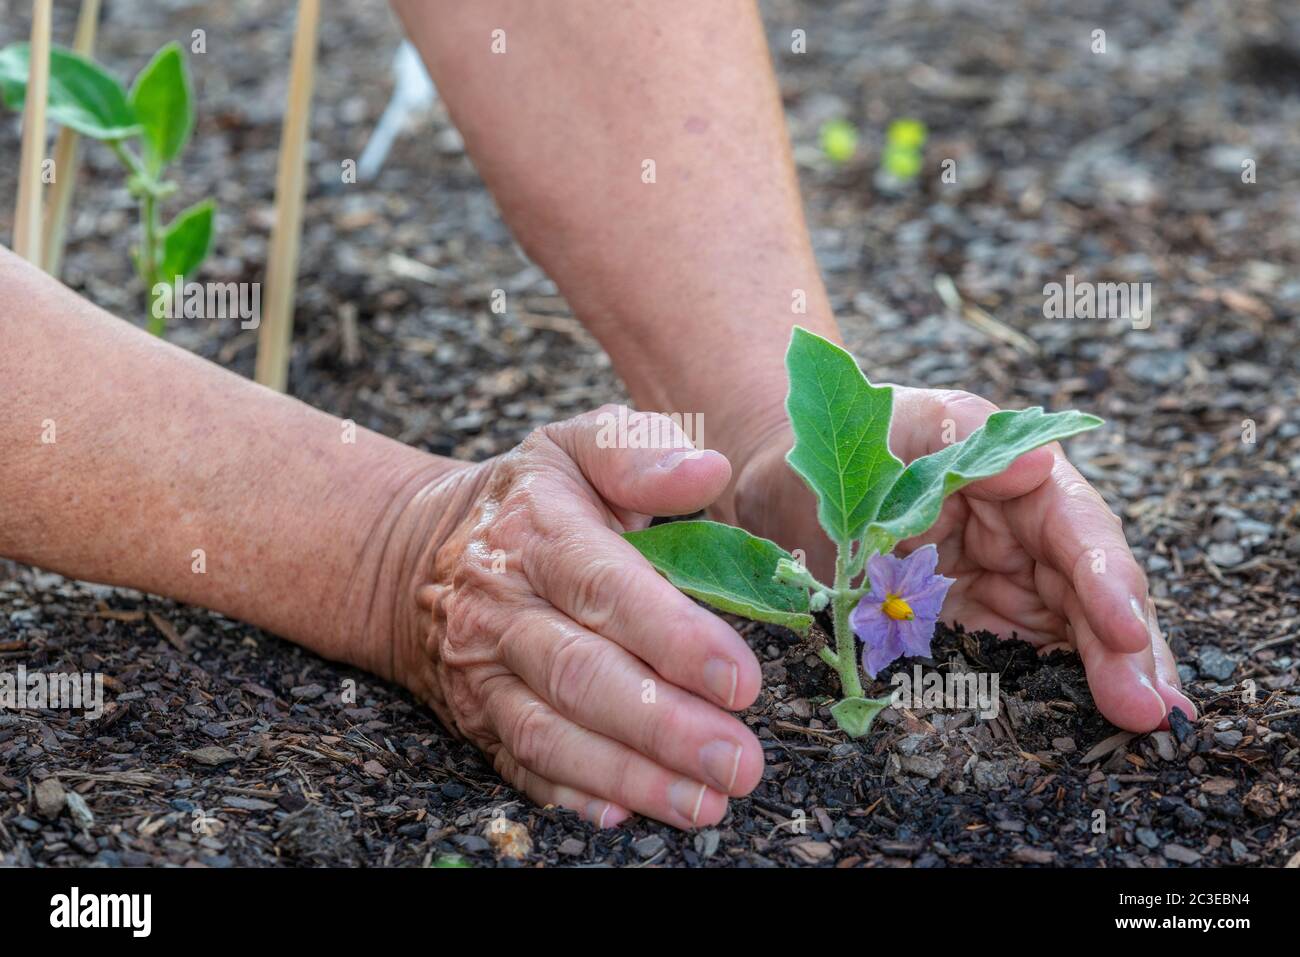 Horizontal shot of a female gardener’s hands and arms tending to a baby eggplant sprout. Stock Photo